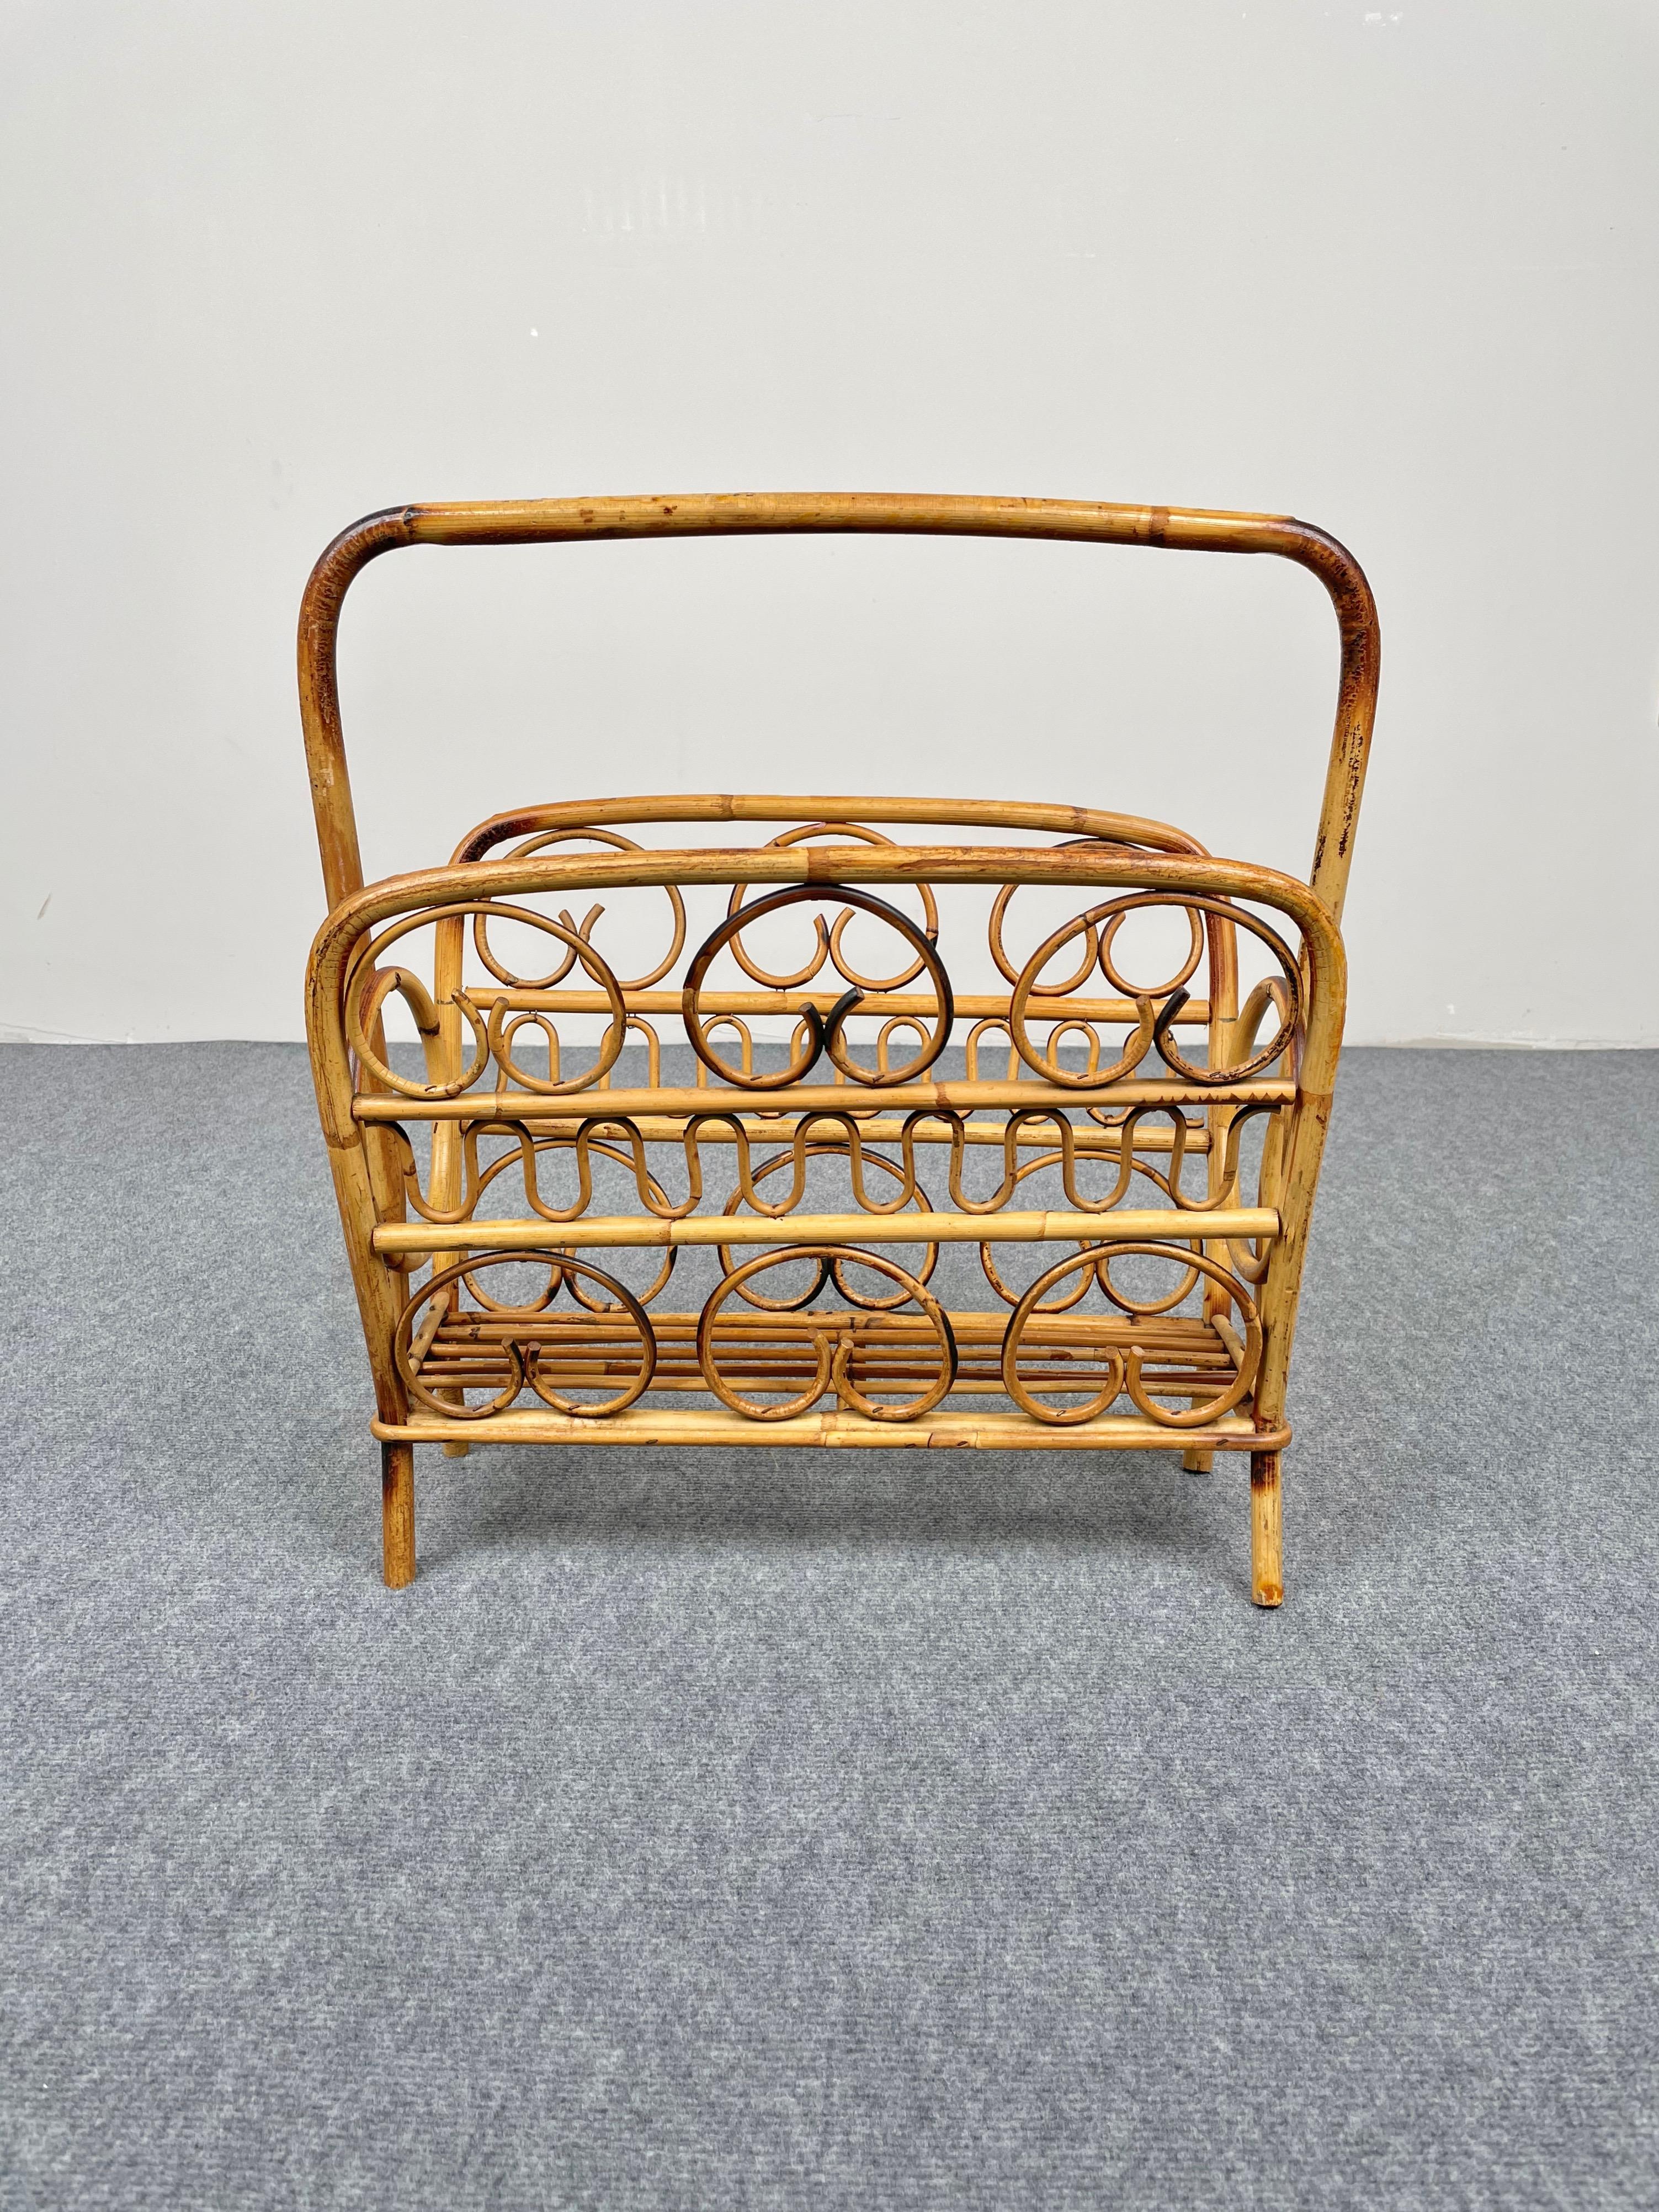 Magazine rack holder in bamboo & rattan made in Italy in the 1960s.